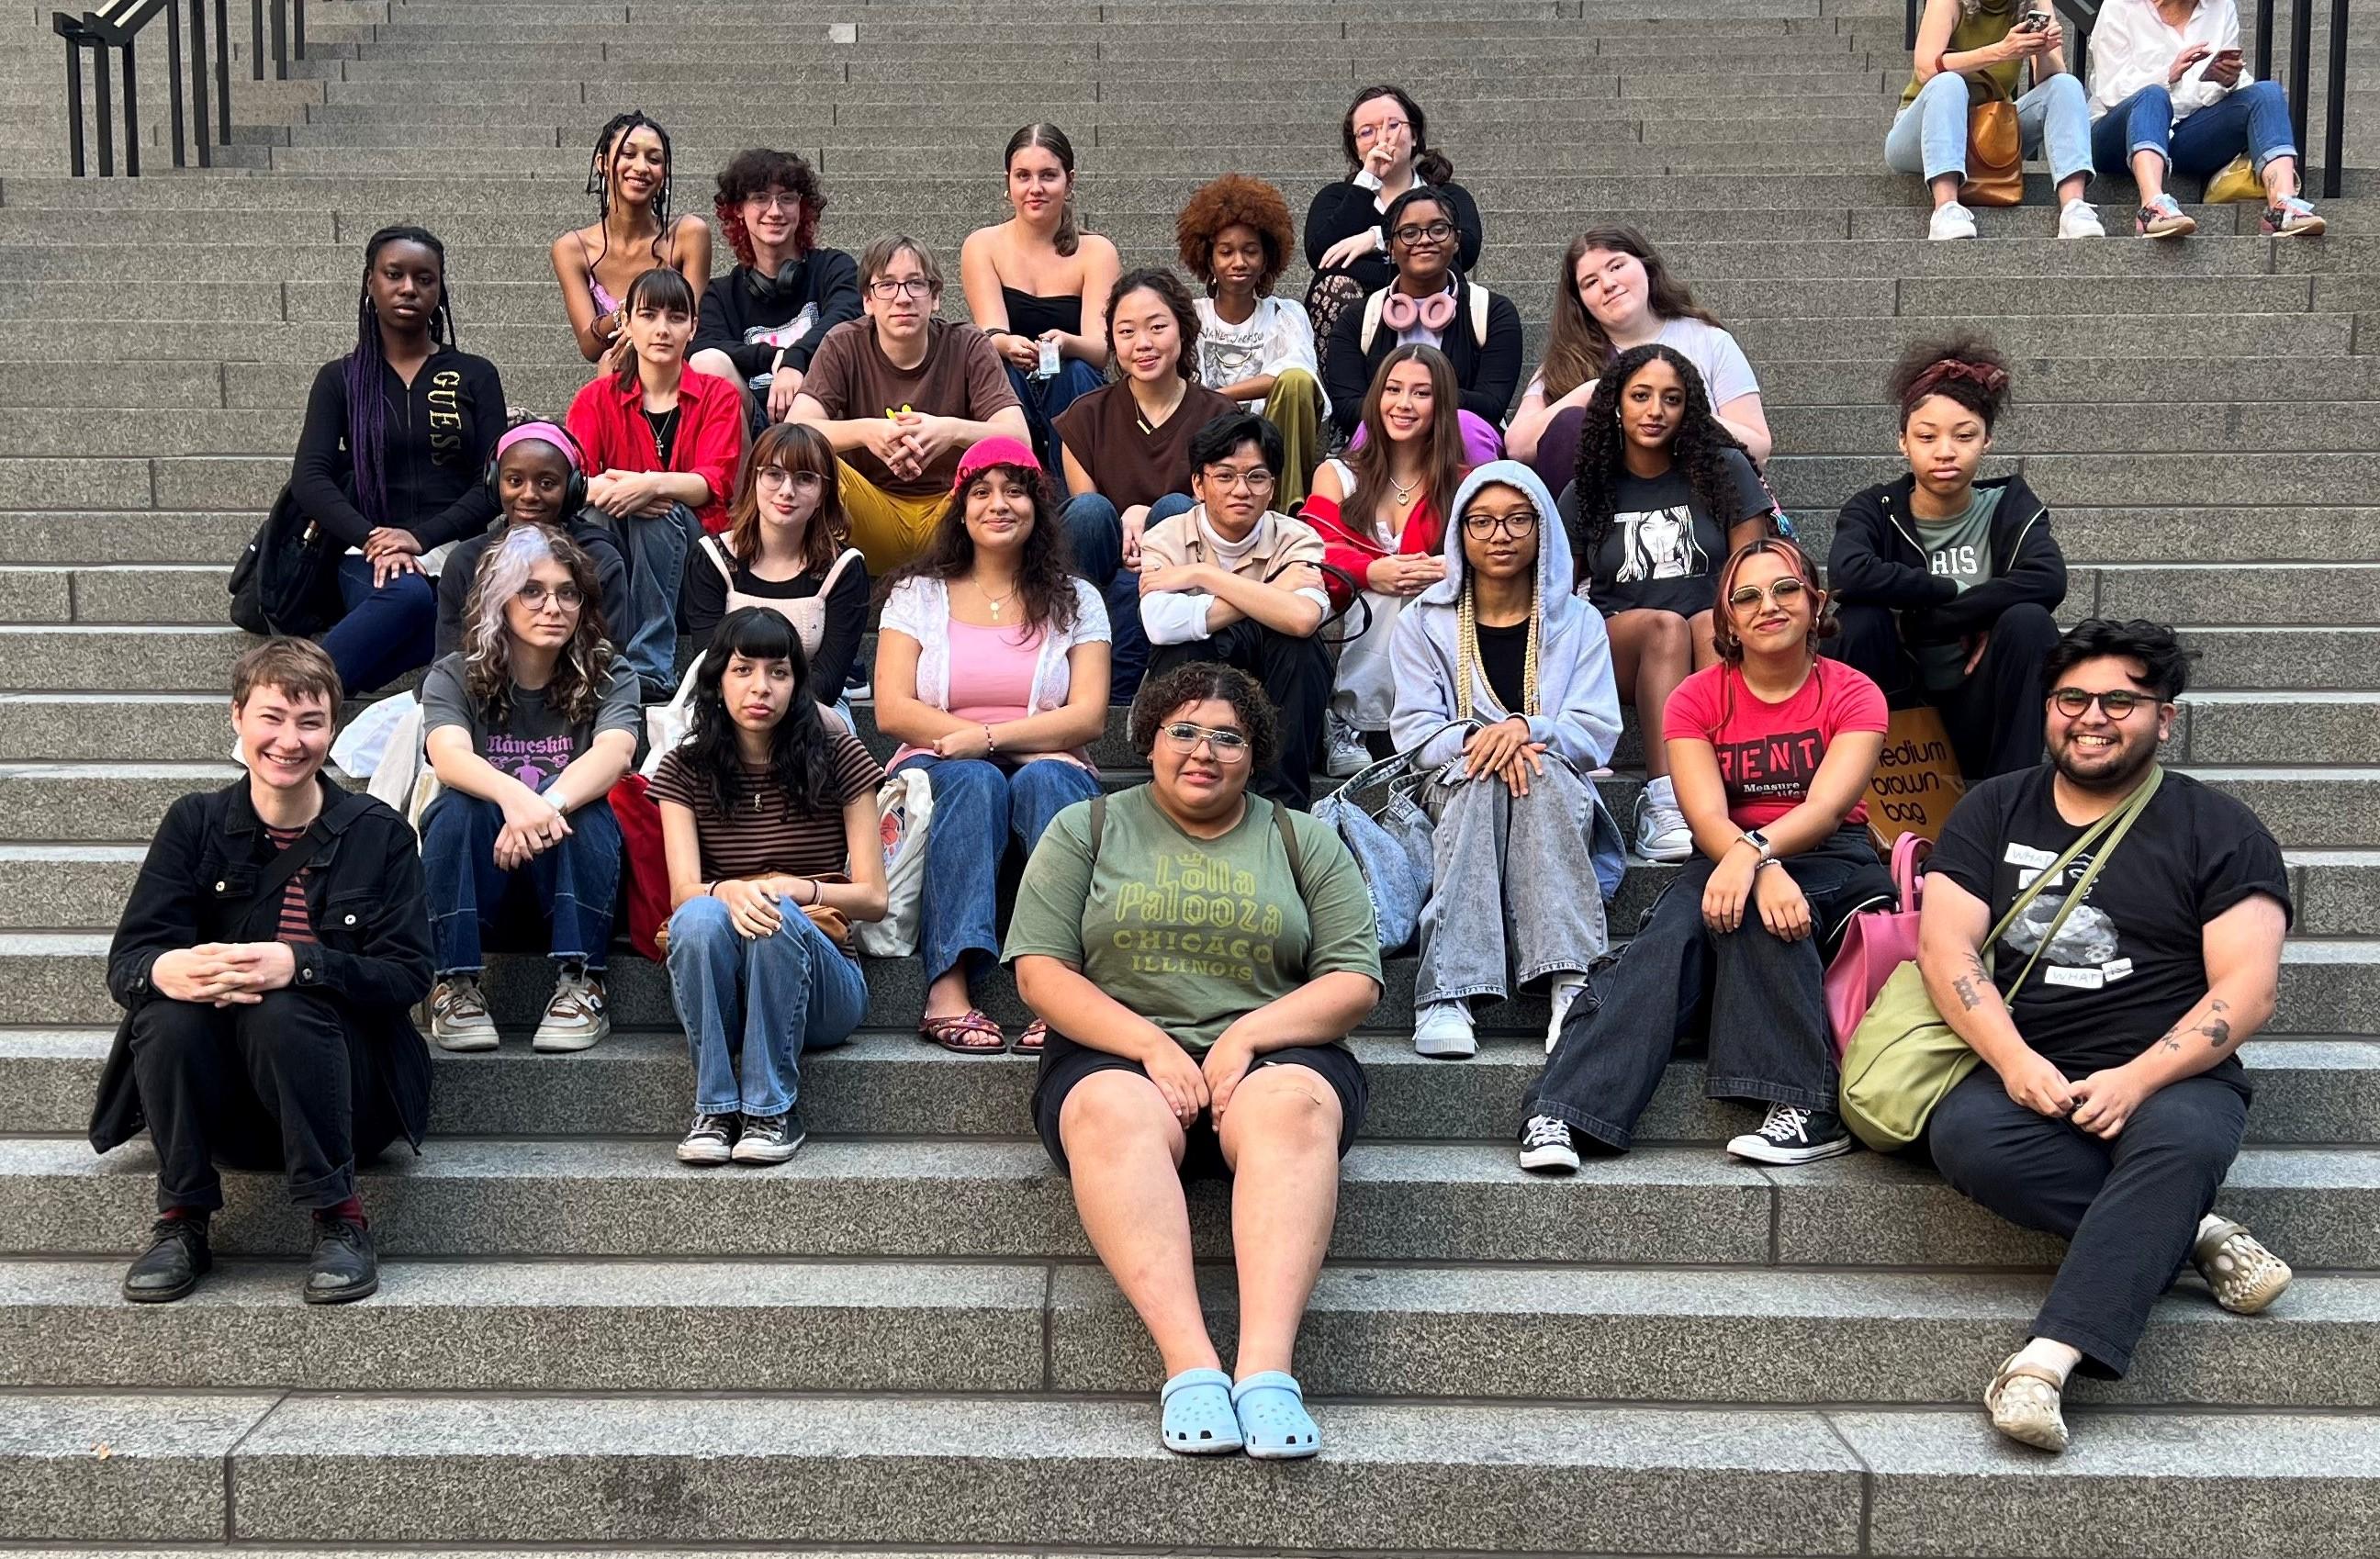 Group portrait of people of various ethnicities sitting on wide gray steps.